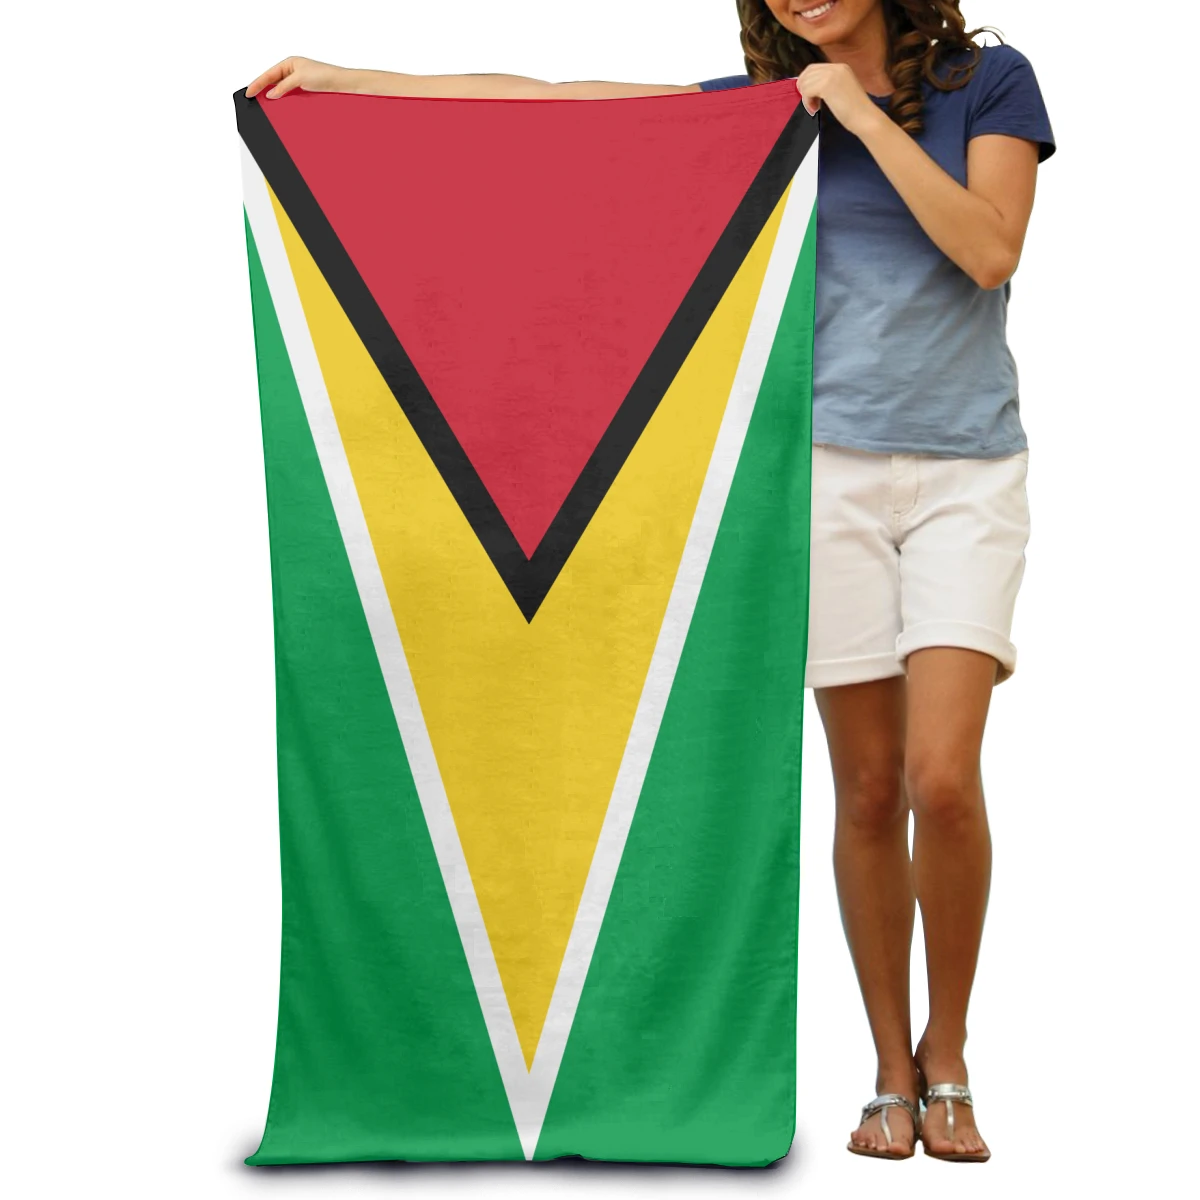 

Guyana National Country Flag Soft Bath Towel Fashion Wearable Beach Spa Wash Clothing Diving Suit Change Swim Robe Summer Pool